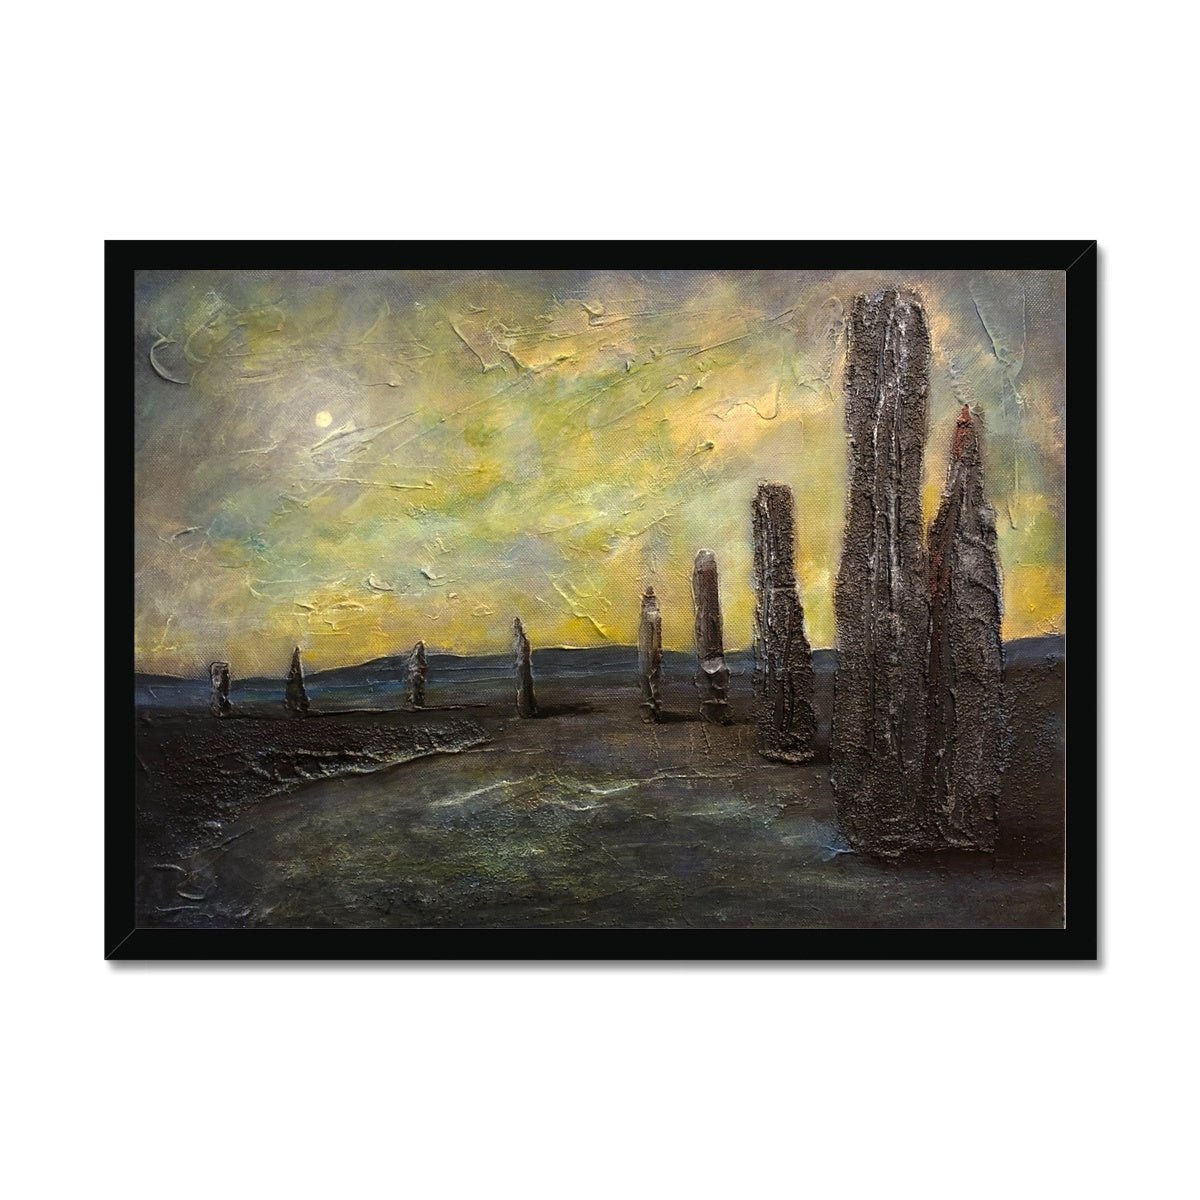 An Ethereal Ring Of Brodgar Orkney Painting | Framed Prints From Scotland-Framed Prints-Orkney Art Gallery-A2 Landscape-Black Frame-Paintings, Prints, Homeware, Art Gifts From Scotland By Scottish Artist Kevin Hunter